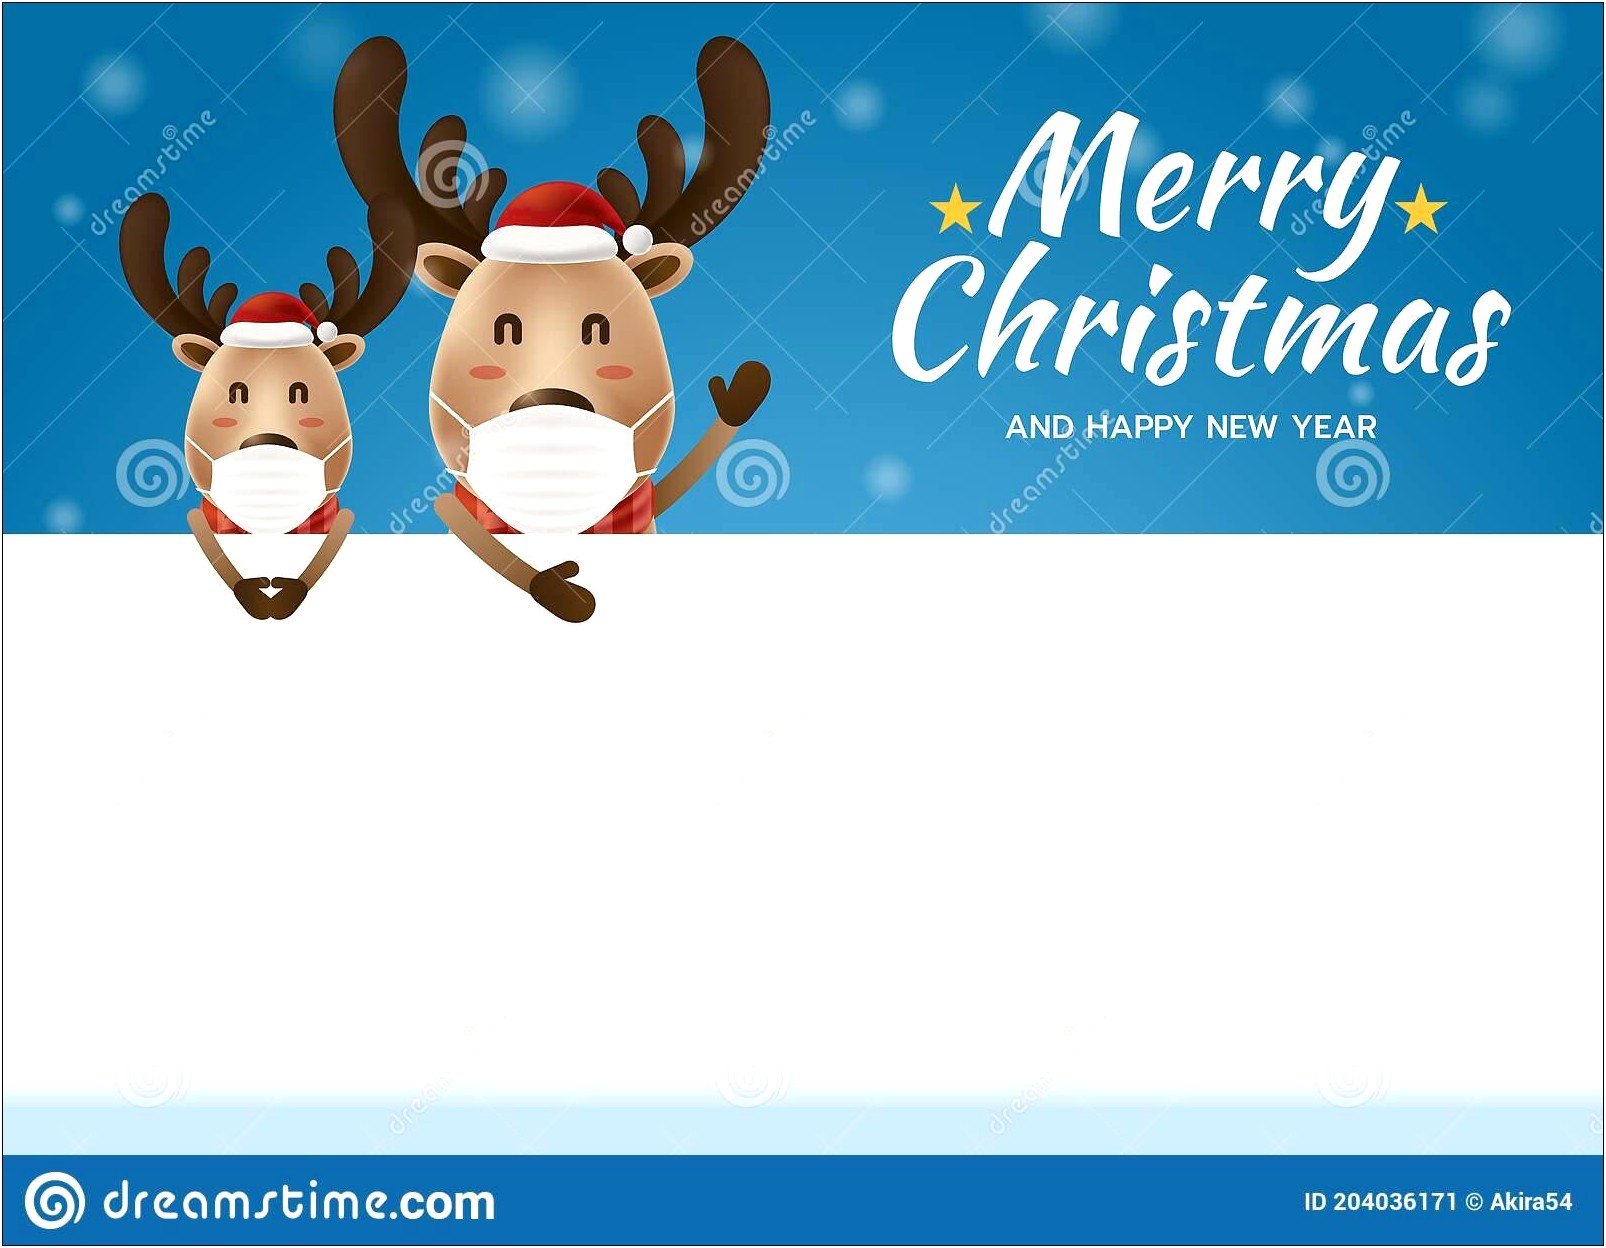 Happy New Year Card Template Microsoft Word